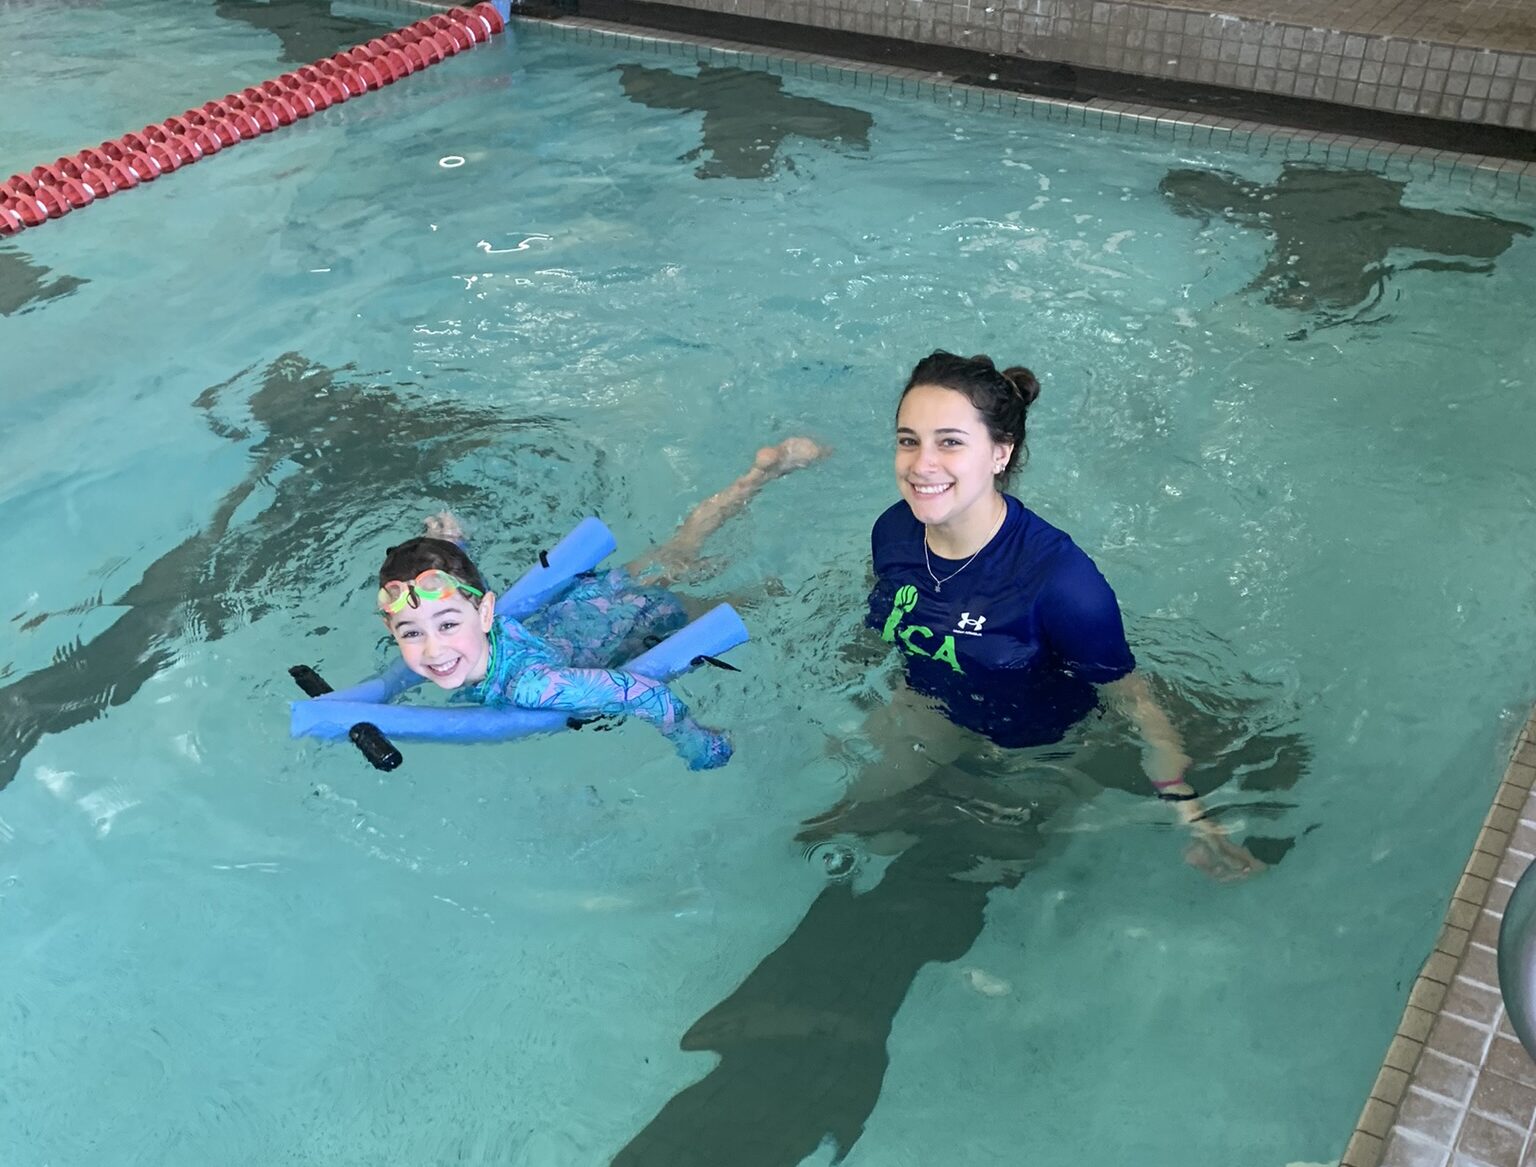 A woman and a child swimming in an indoor pool.